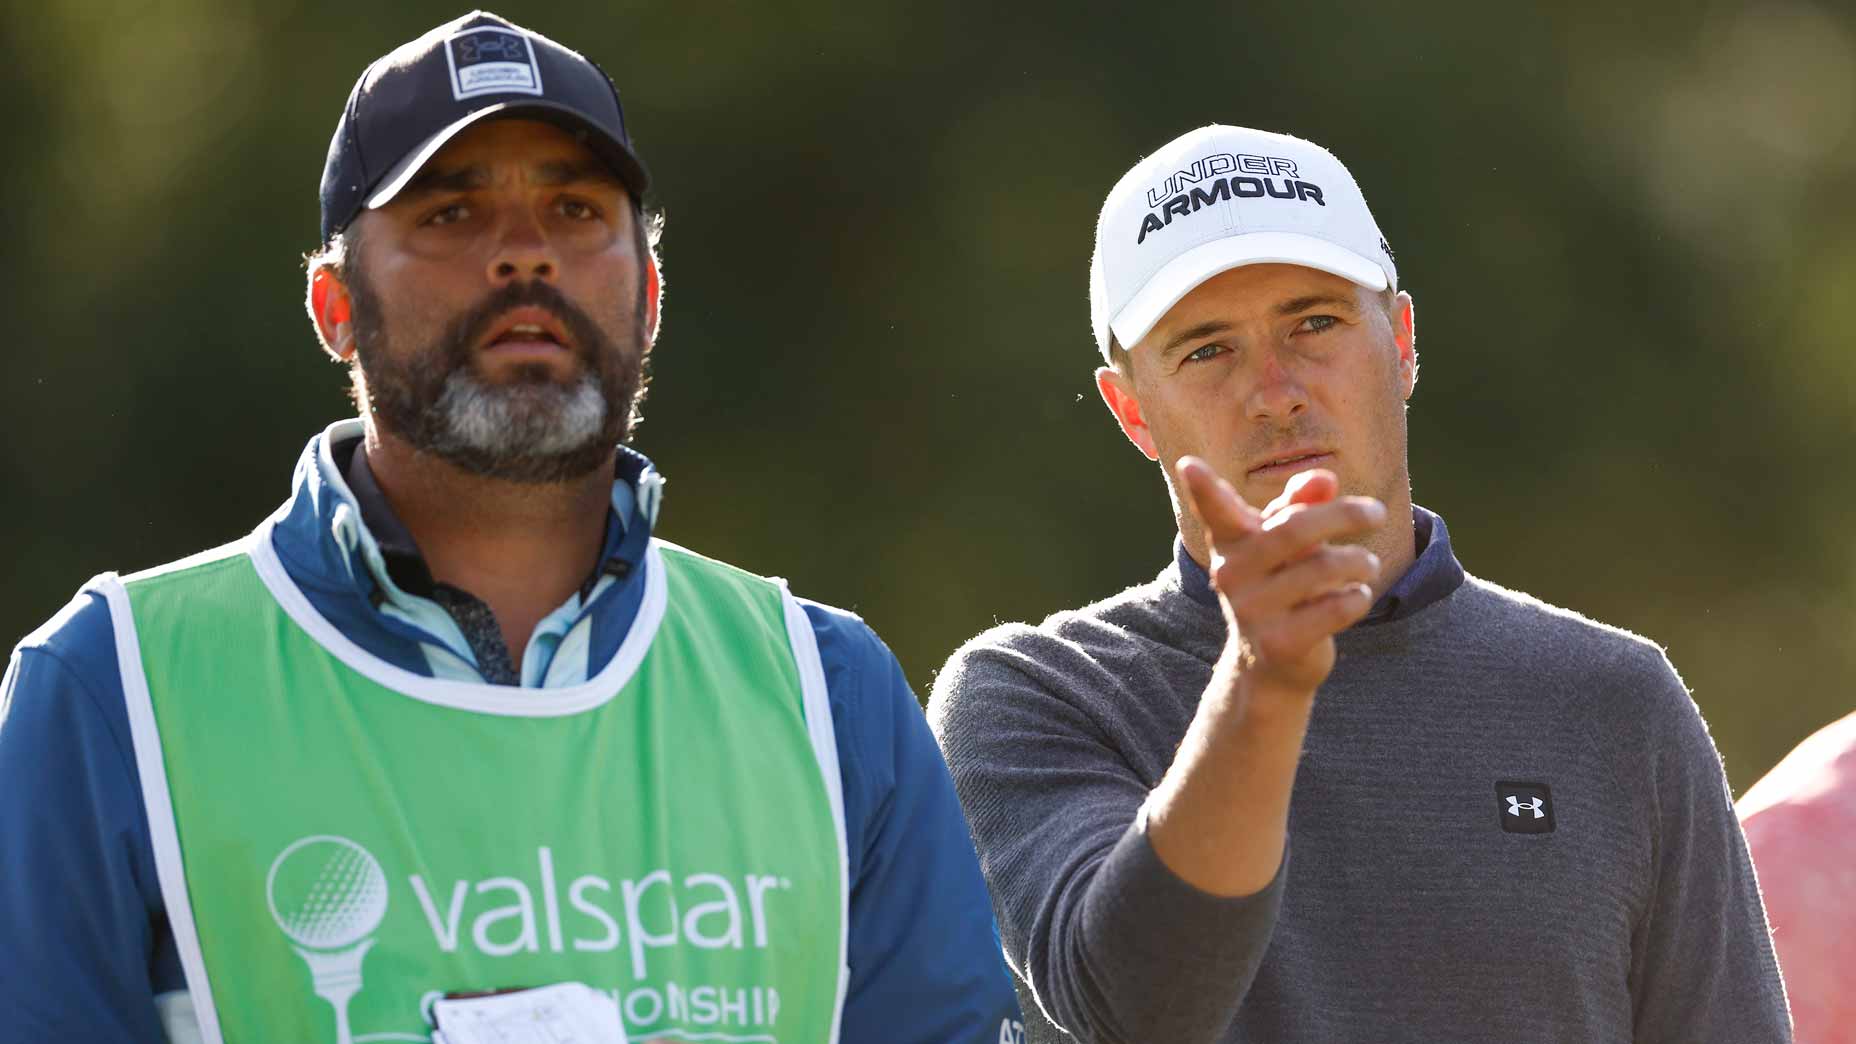 How to watch the 2023 Valspar Championship on Friday Round 2 live coverage